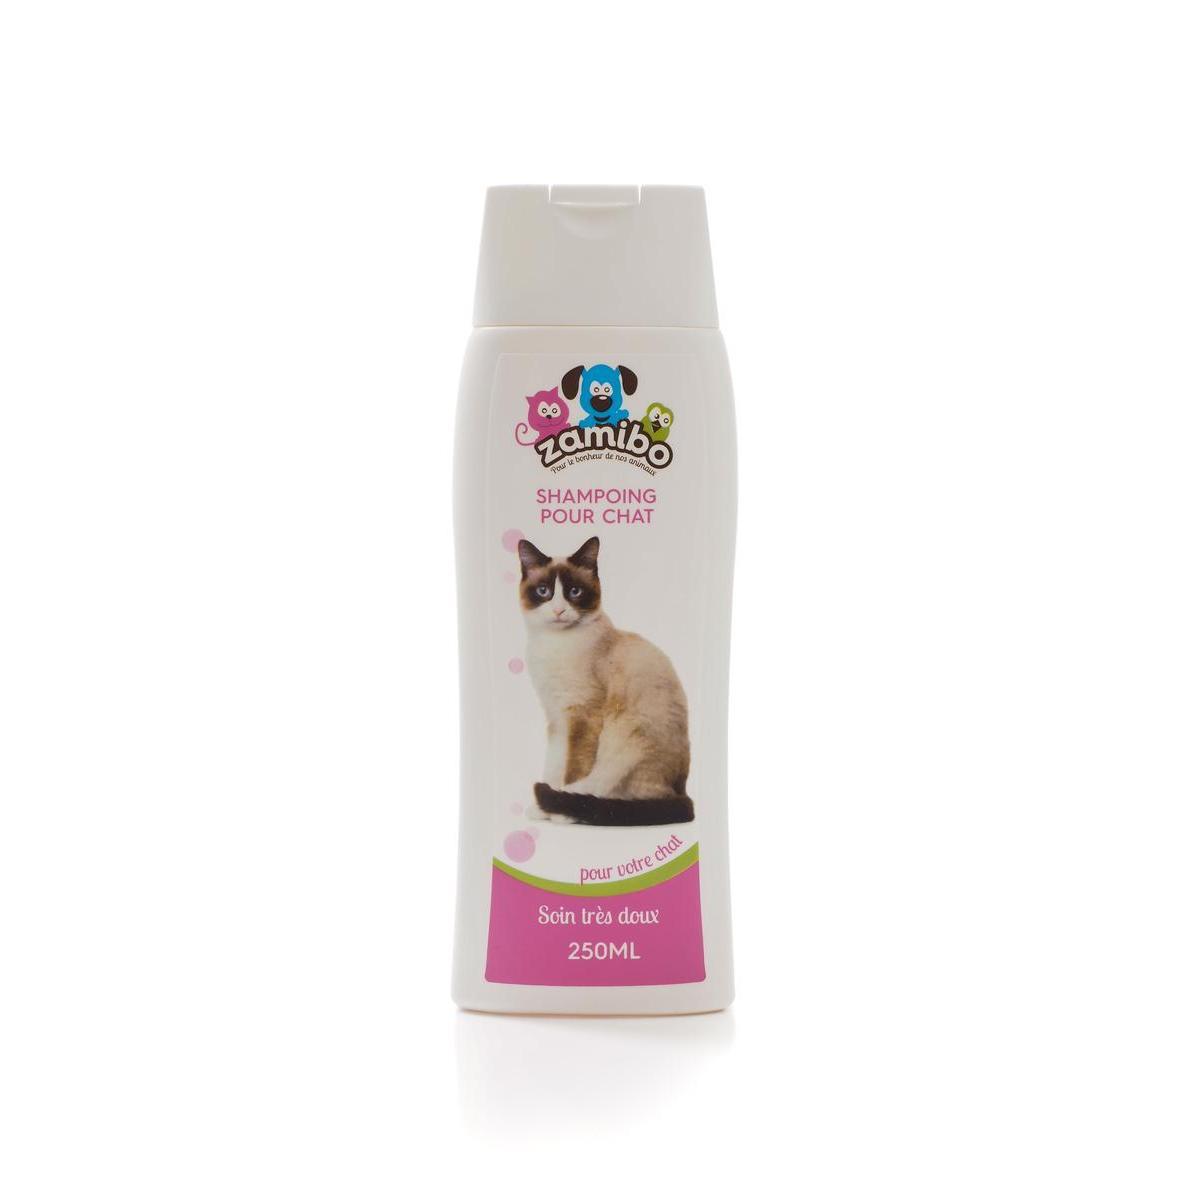 Shampoing pour chat - 250 ml